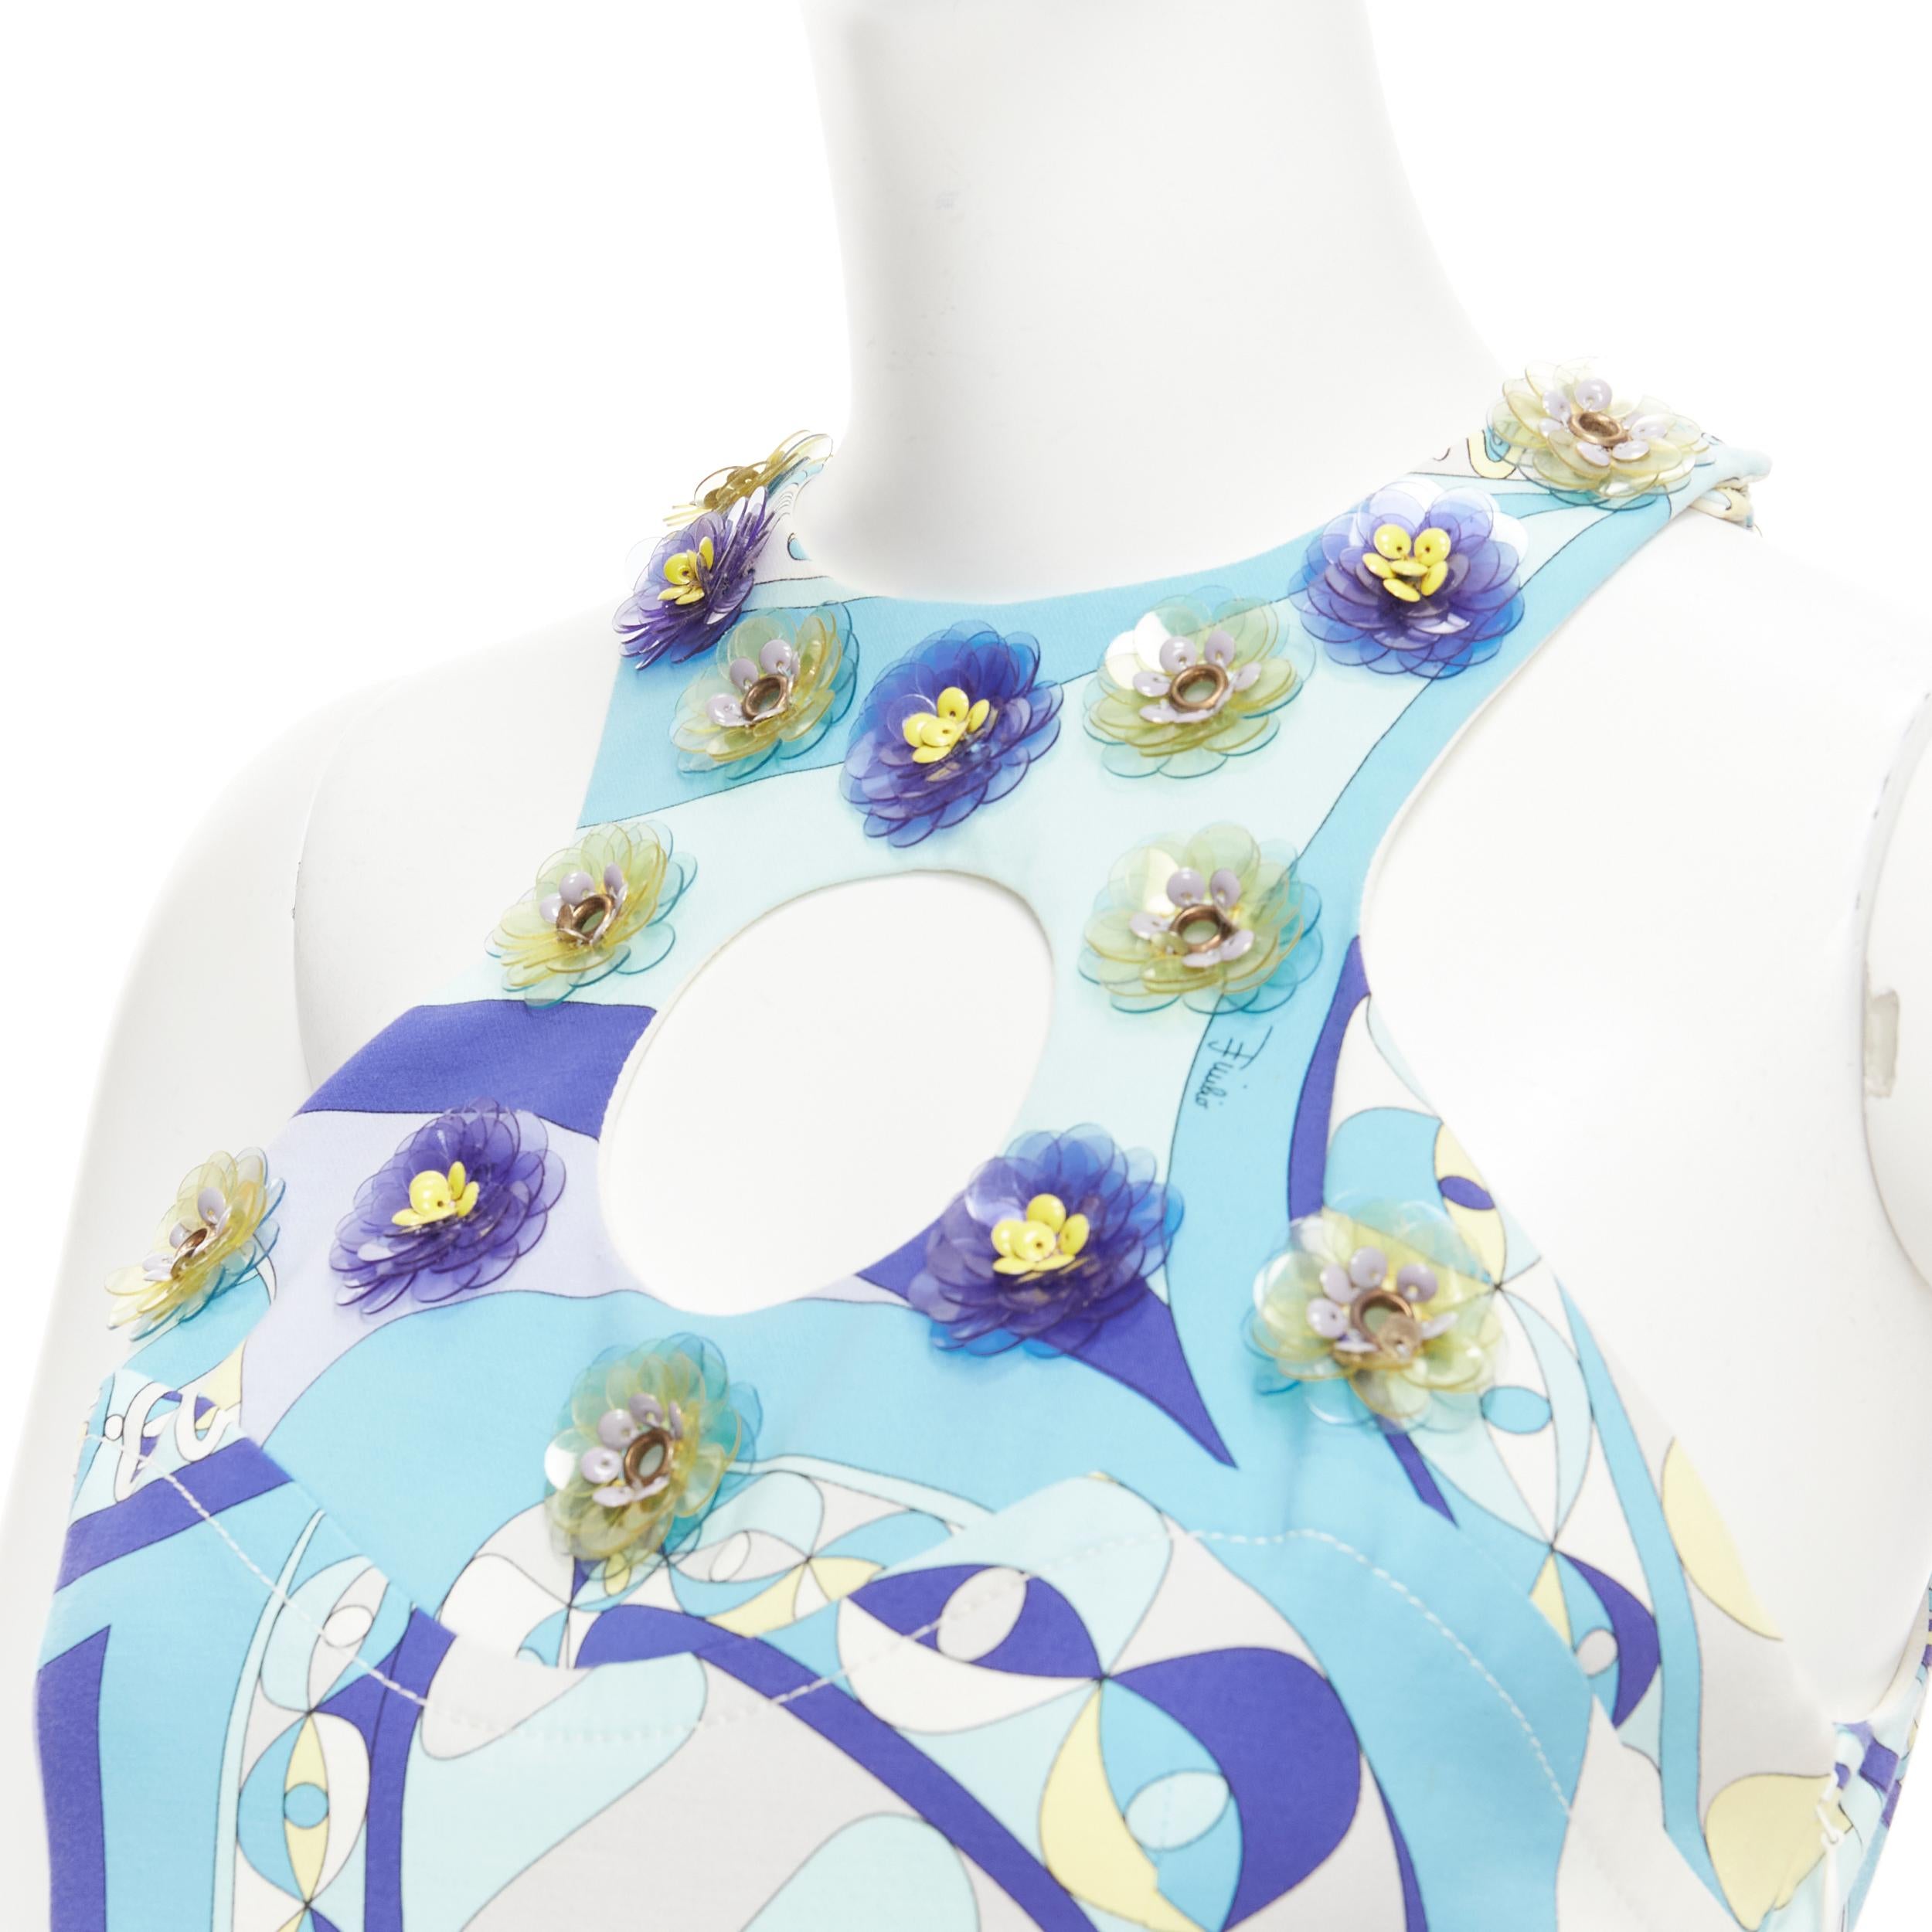 EMILIO PUCCI blue geometric floral print cut out flower applique halter mini dress
Reference: CC/A00401
Brand: Emilio Pucci
Material: Fabric
Color: Blue, Multicolour
Pattern: Abstract
Closure: Zip
Lining: White Fabric
Extra Details: Side zip